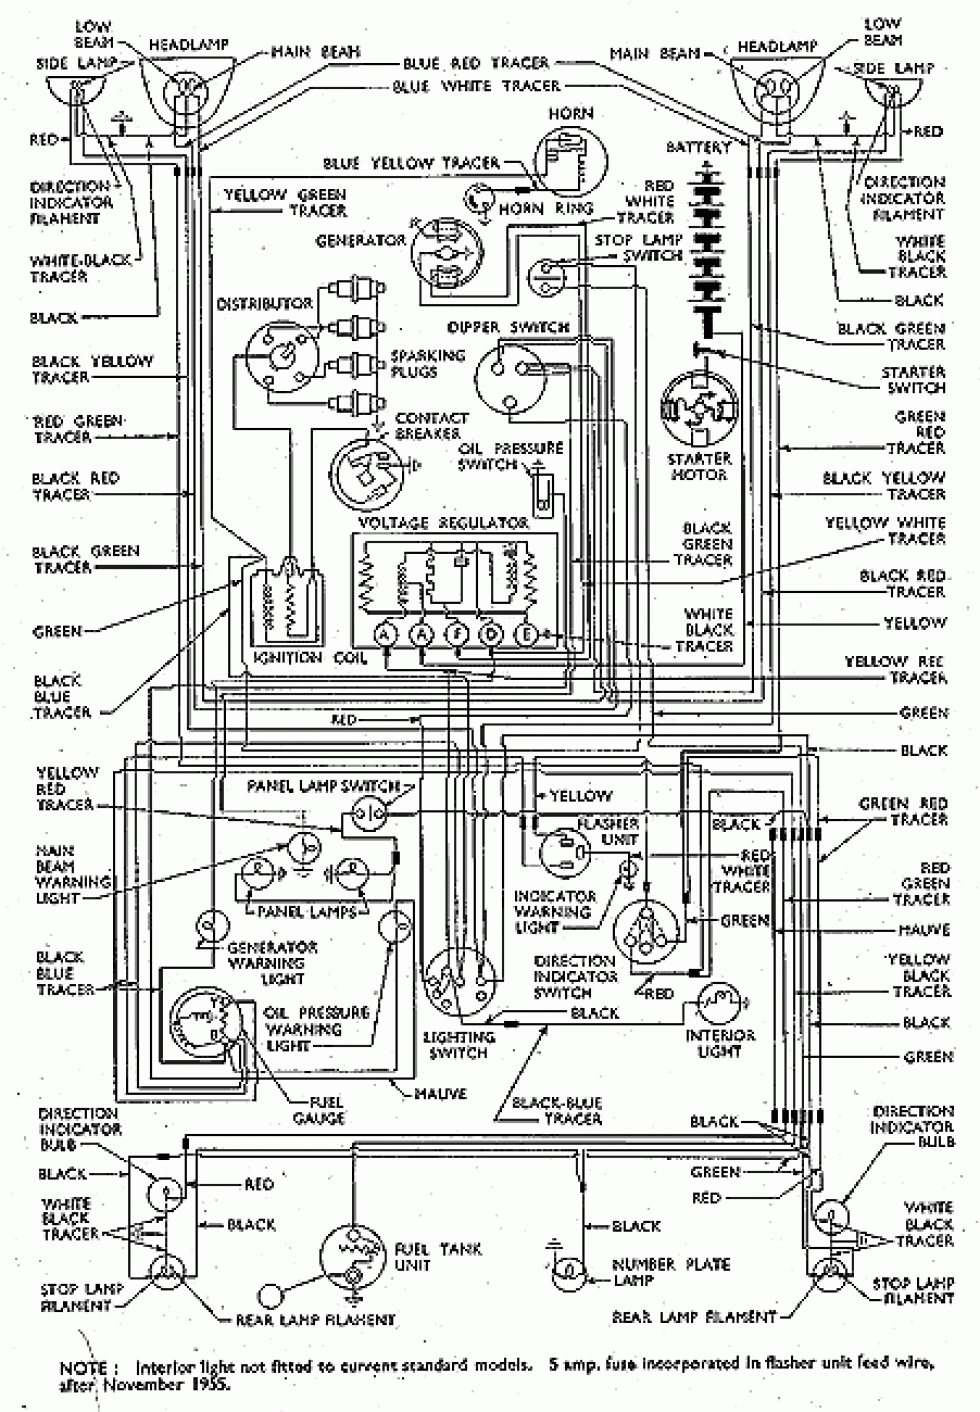 Wiring Diagram Model A Ford from www.smallfordspares.co.uk